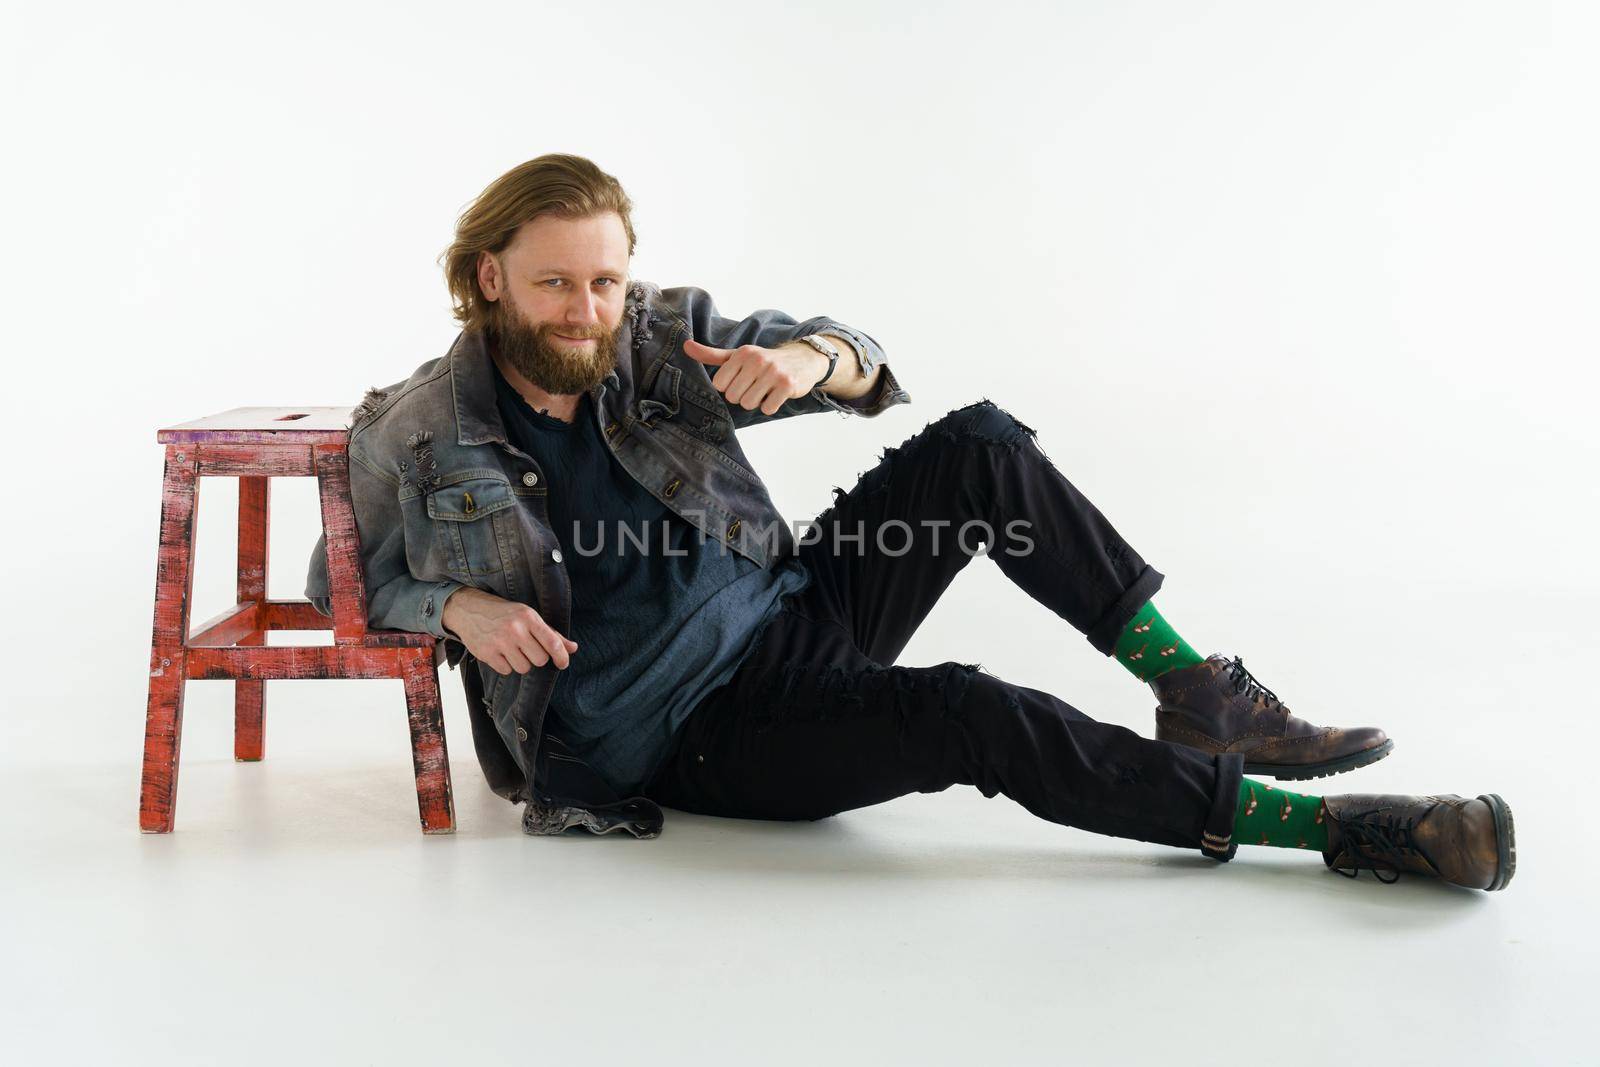 a handsome brutal bearded and long-haired man sits on the floor leaning on a chair on a white background, he is dressed in a denim jacket and pants with bright green socks, dressed like a hipster. High quality photo